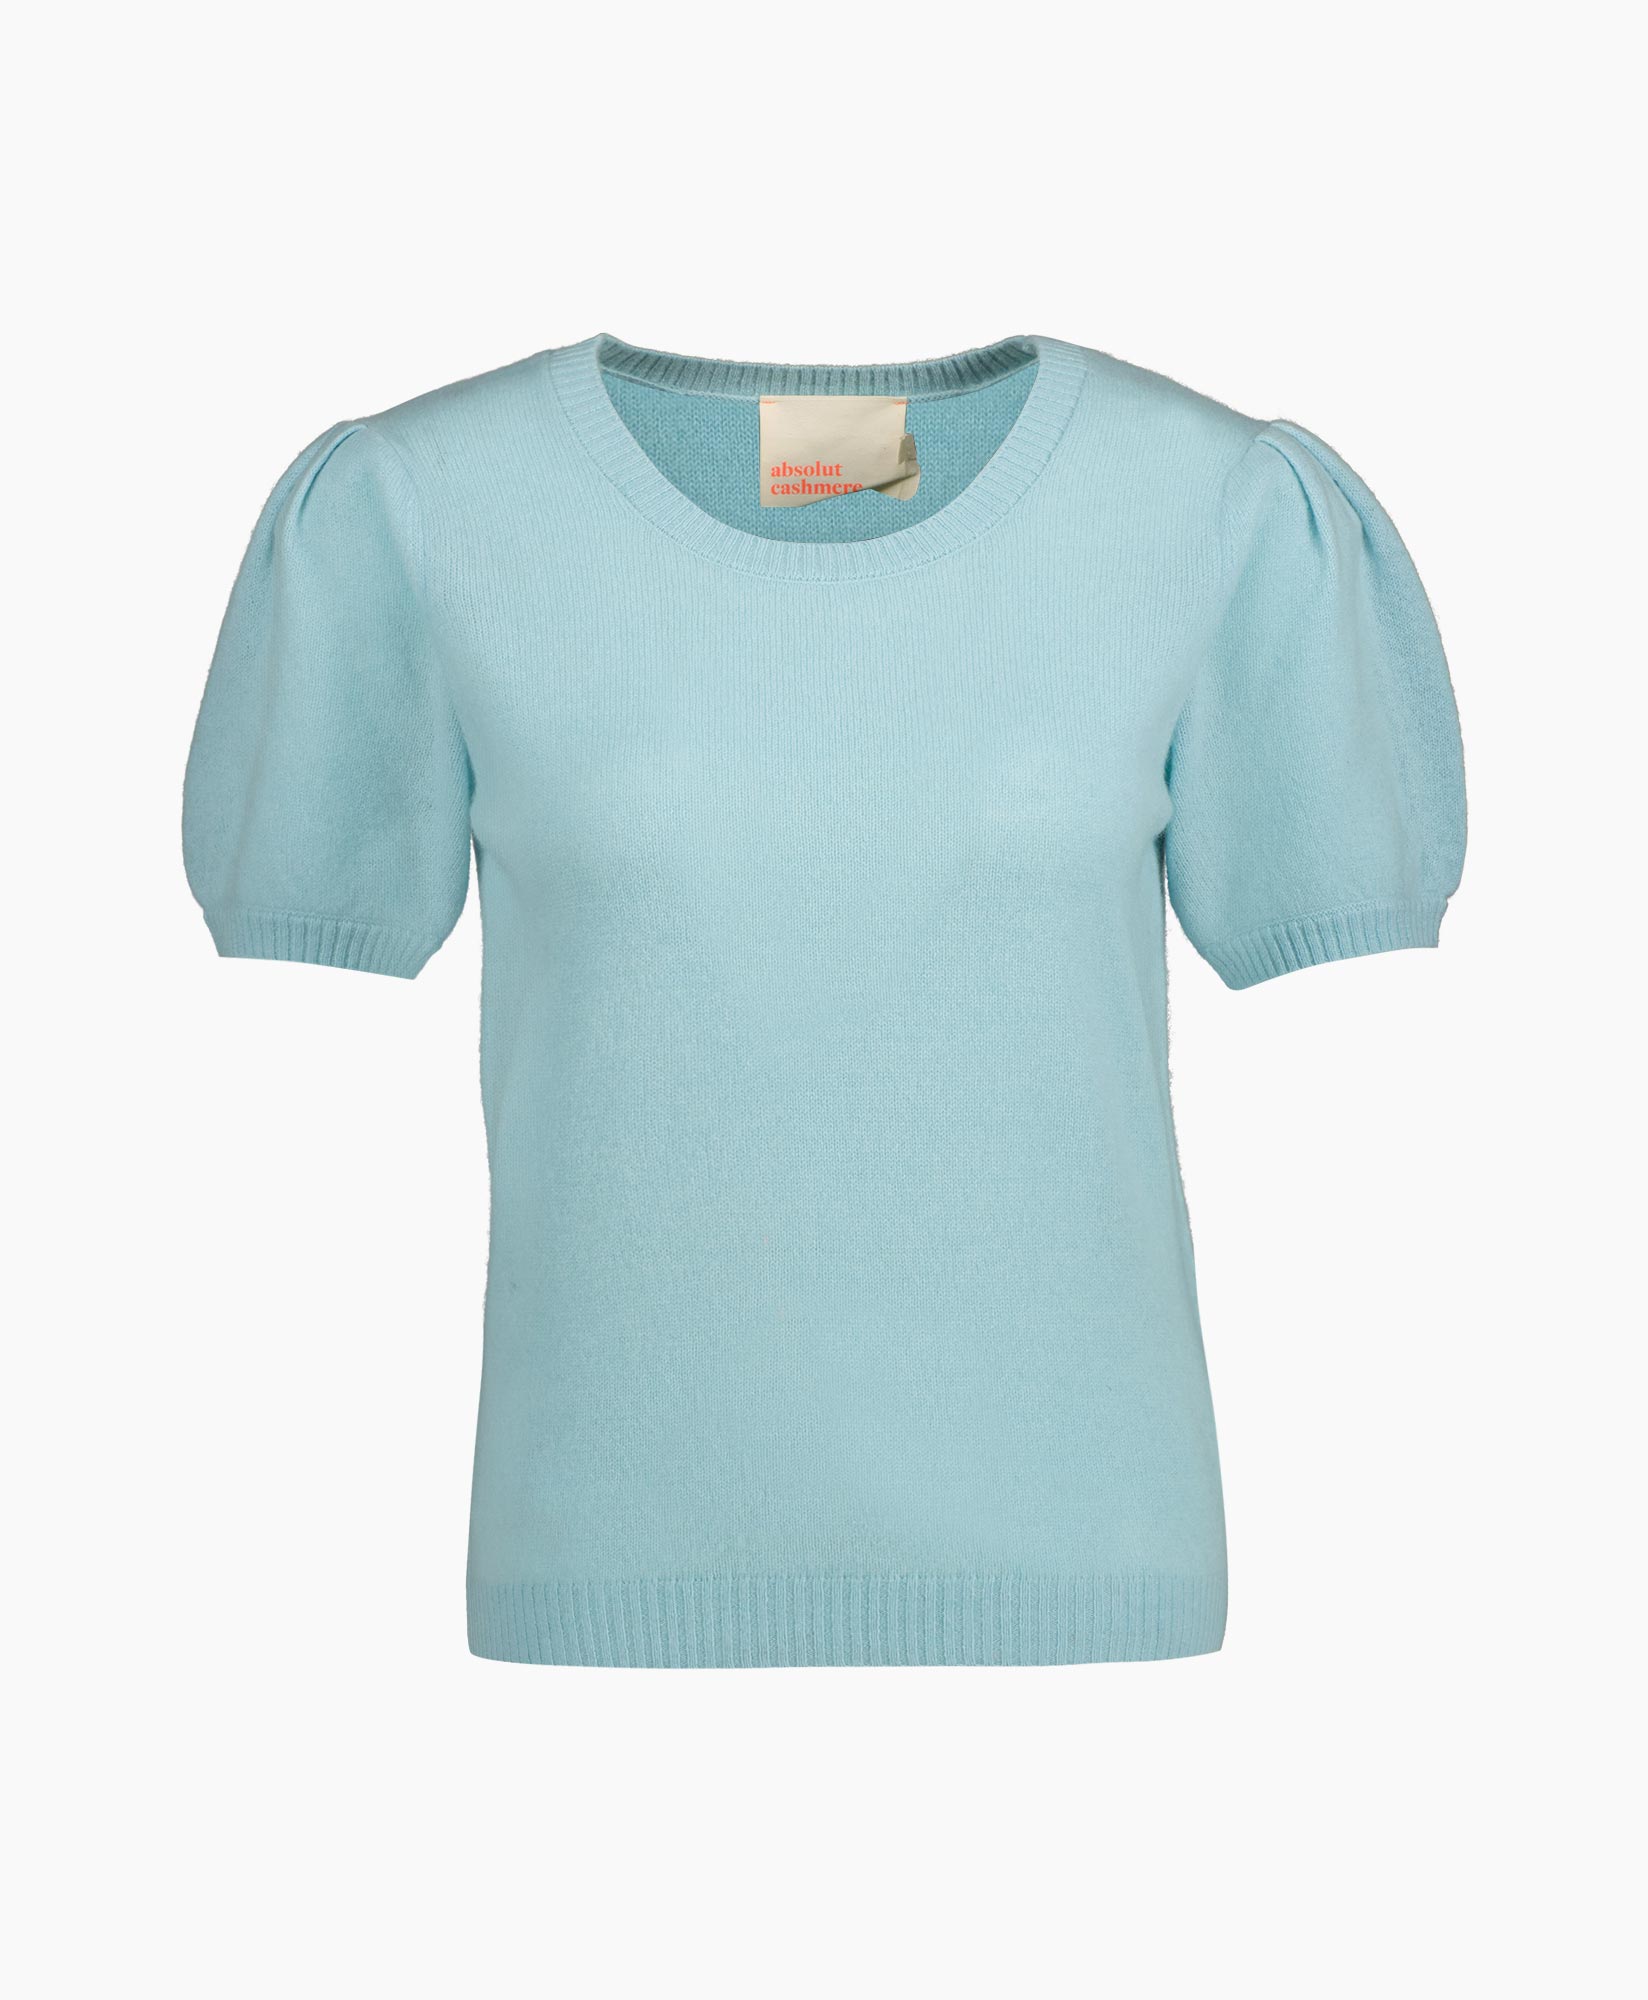 Absolut Cashmere Pullover Eleanore Mint